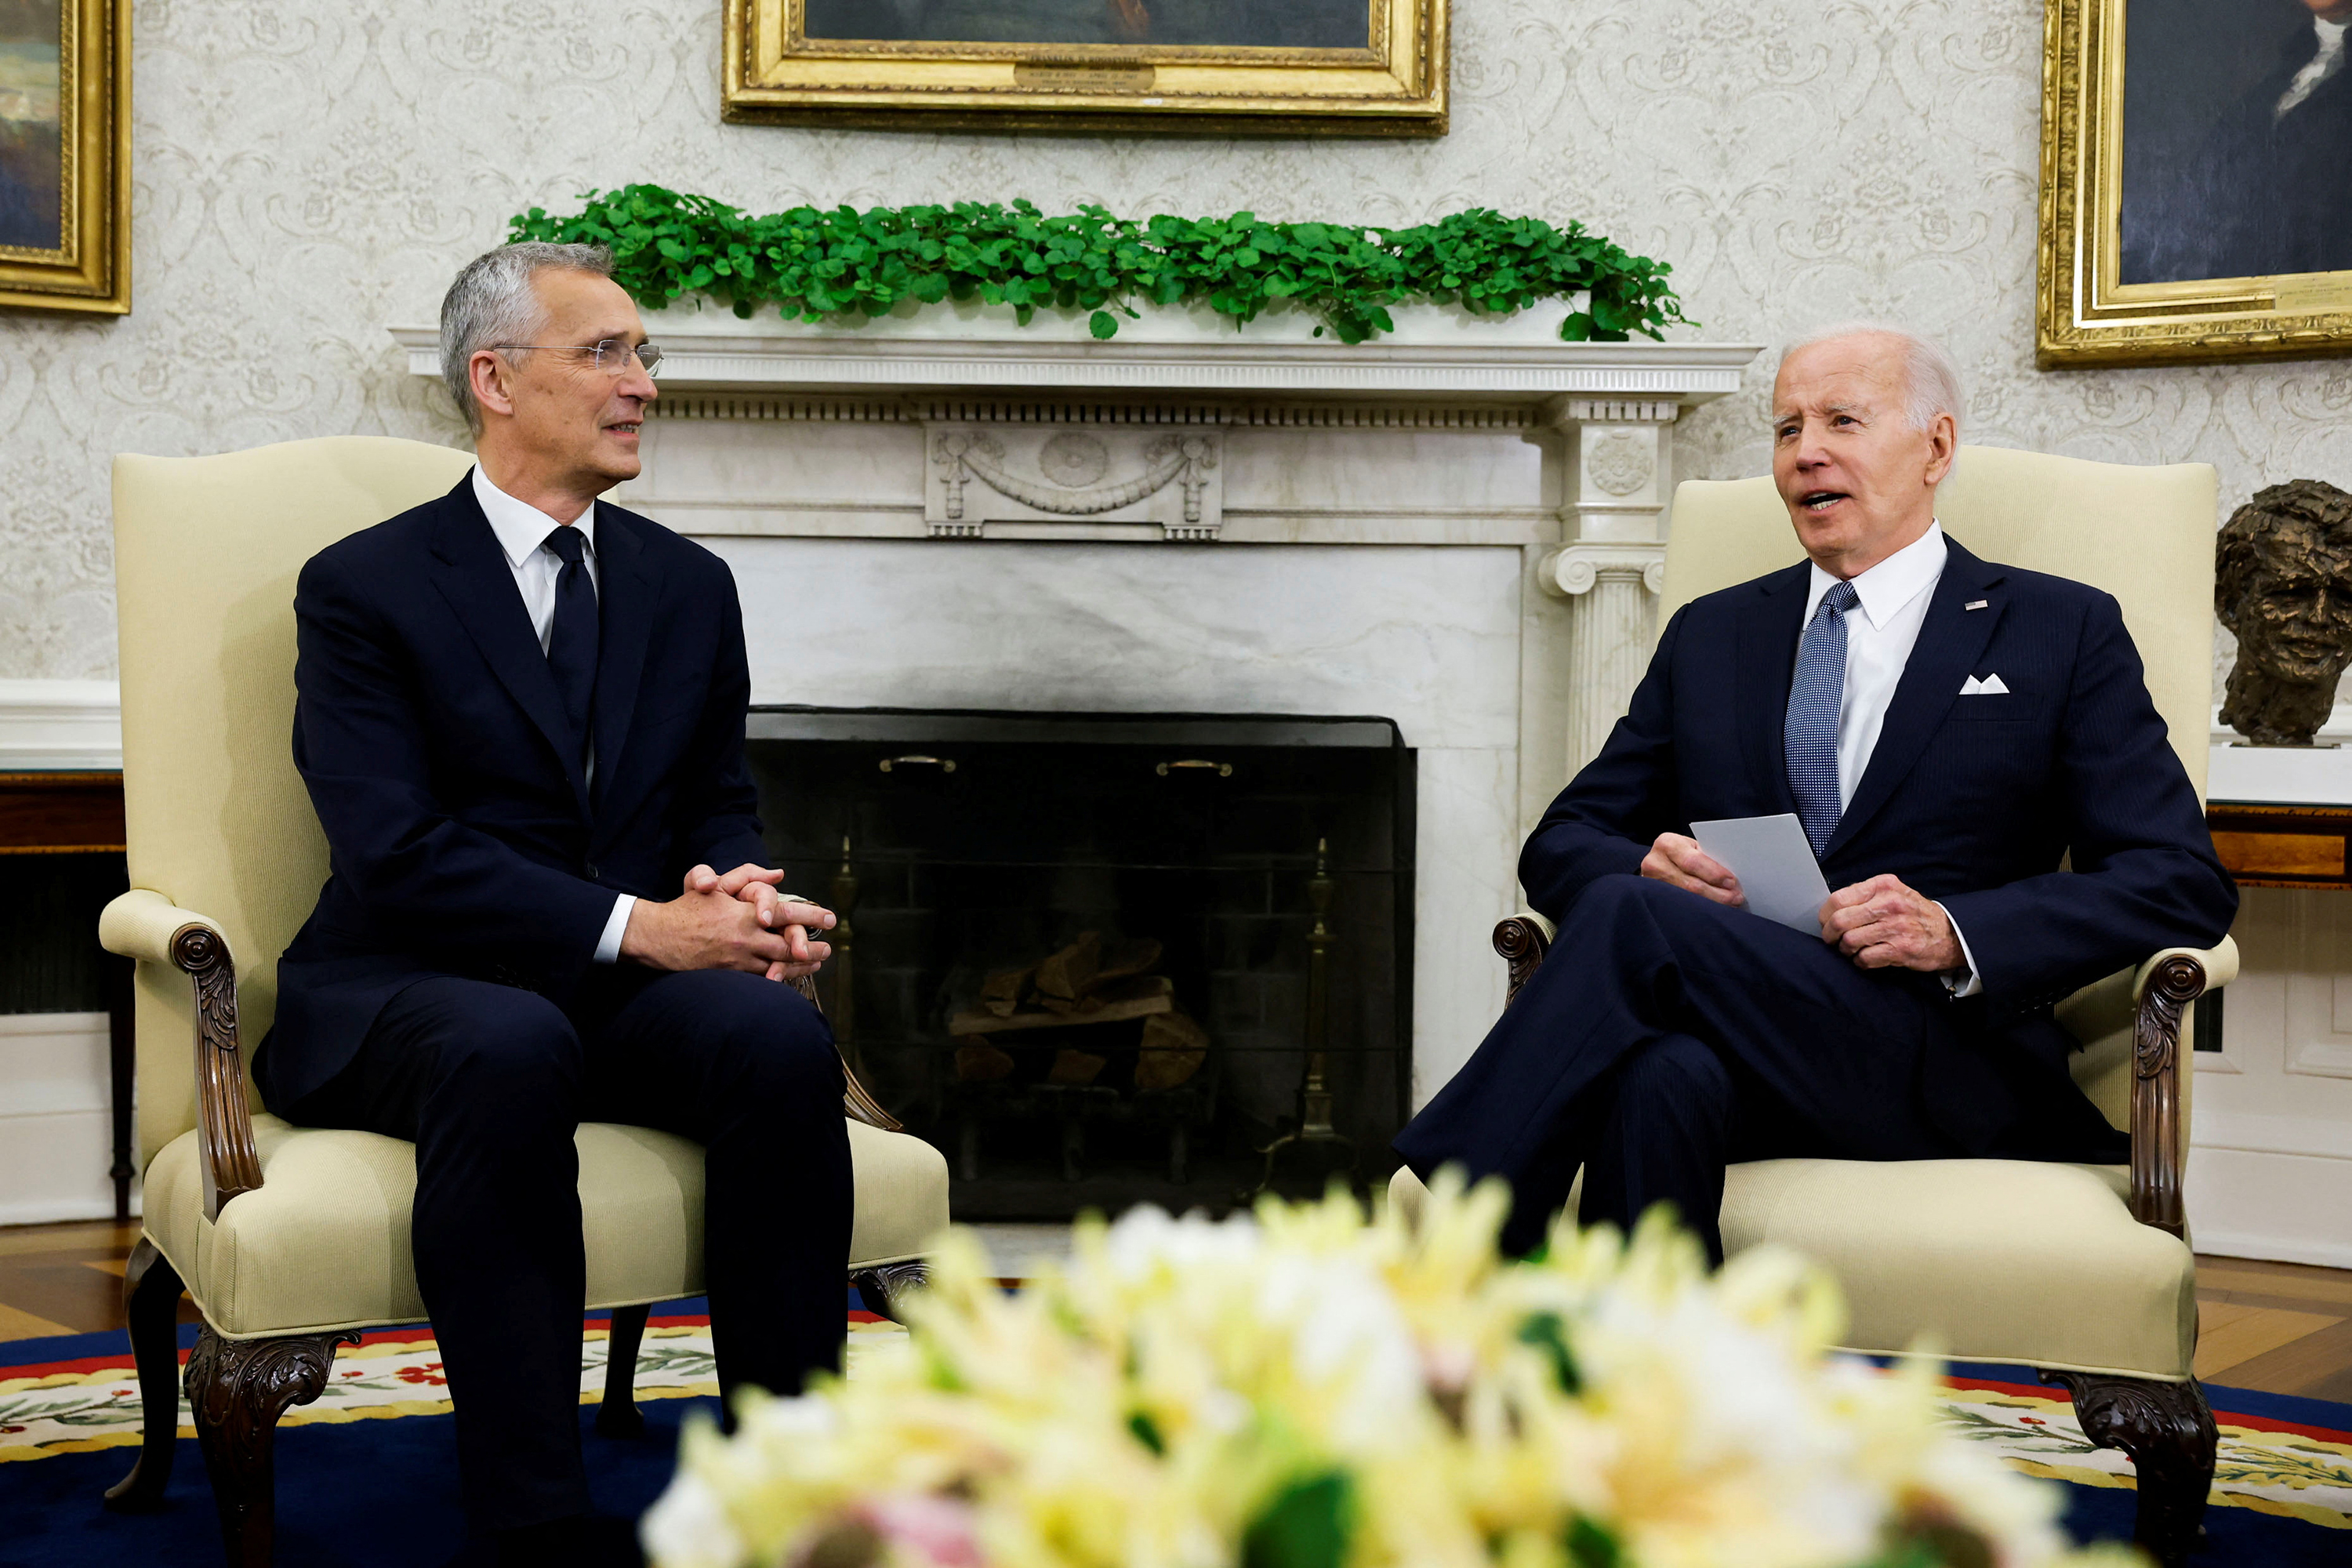 President Joe Biden meets with NATO Secretary General Jens Stoltenberg in the Oval Office at the White House in Washington, DC, on June 13.